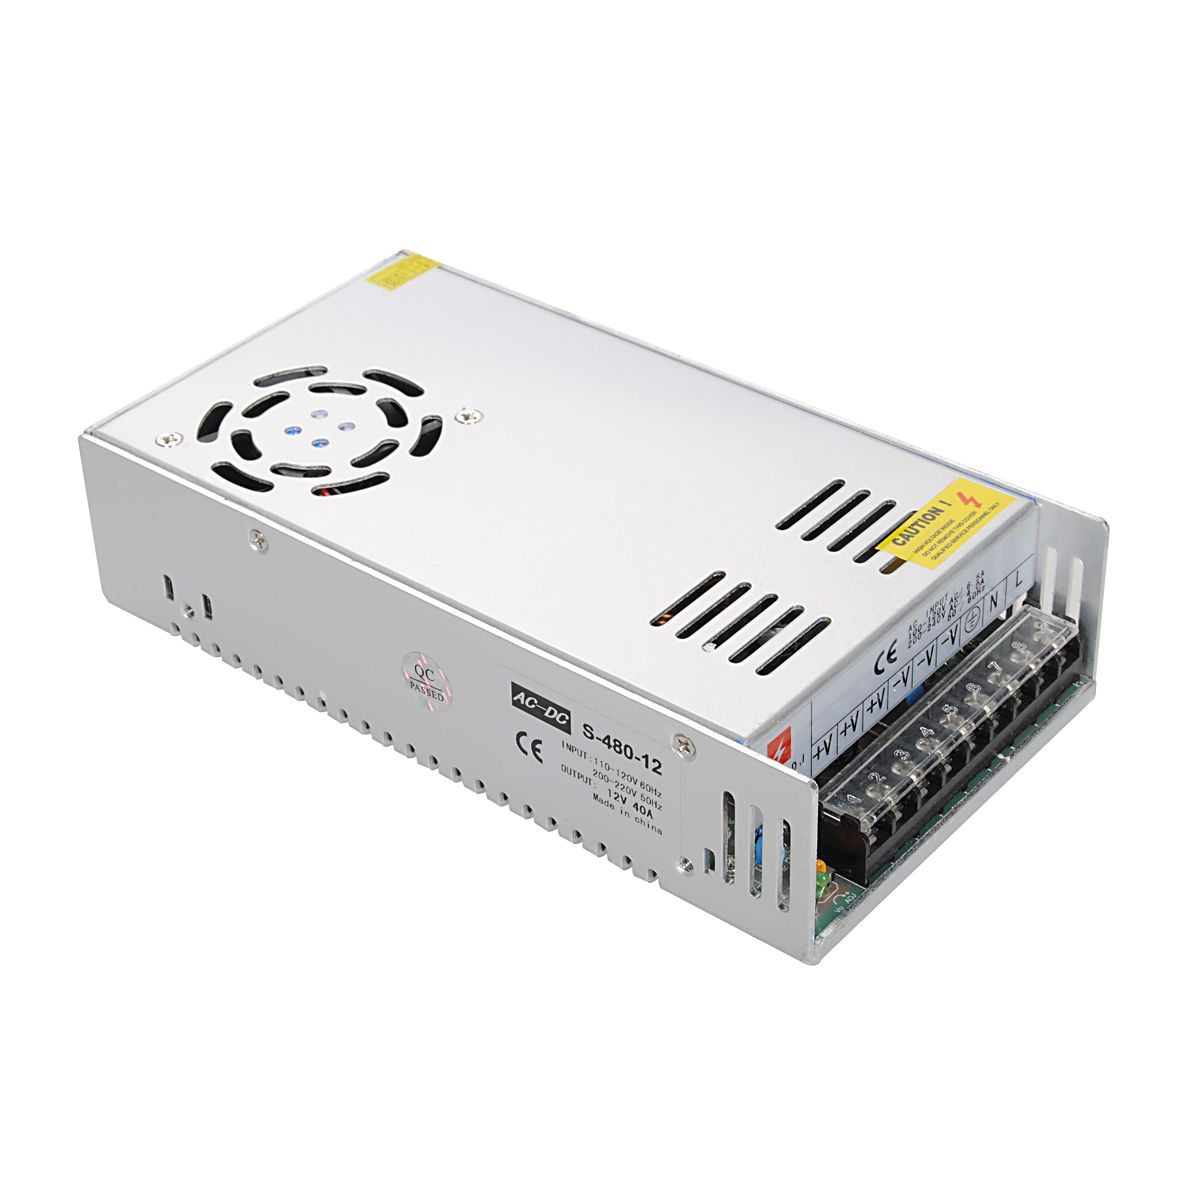 Switching-Power-Supply-85-265V-To-12V-40A-480W-For-LED-Strip-Light-968154